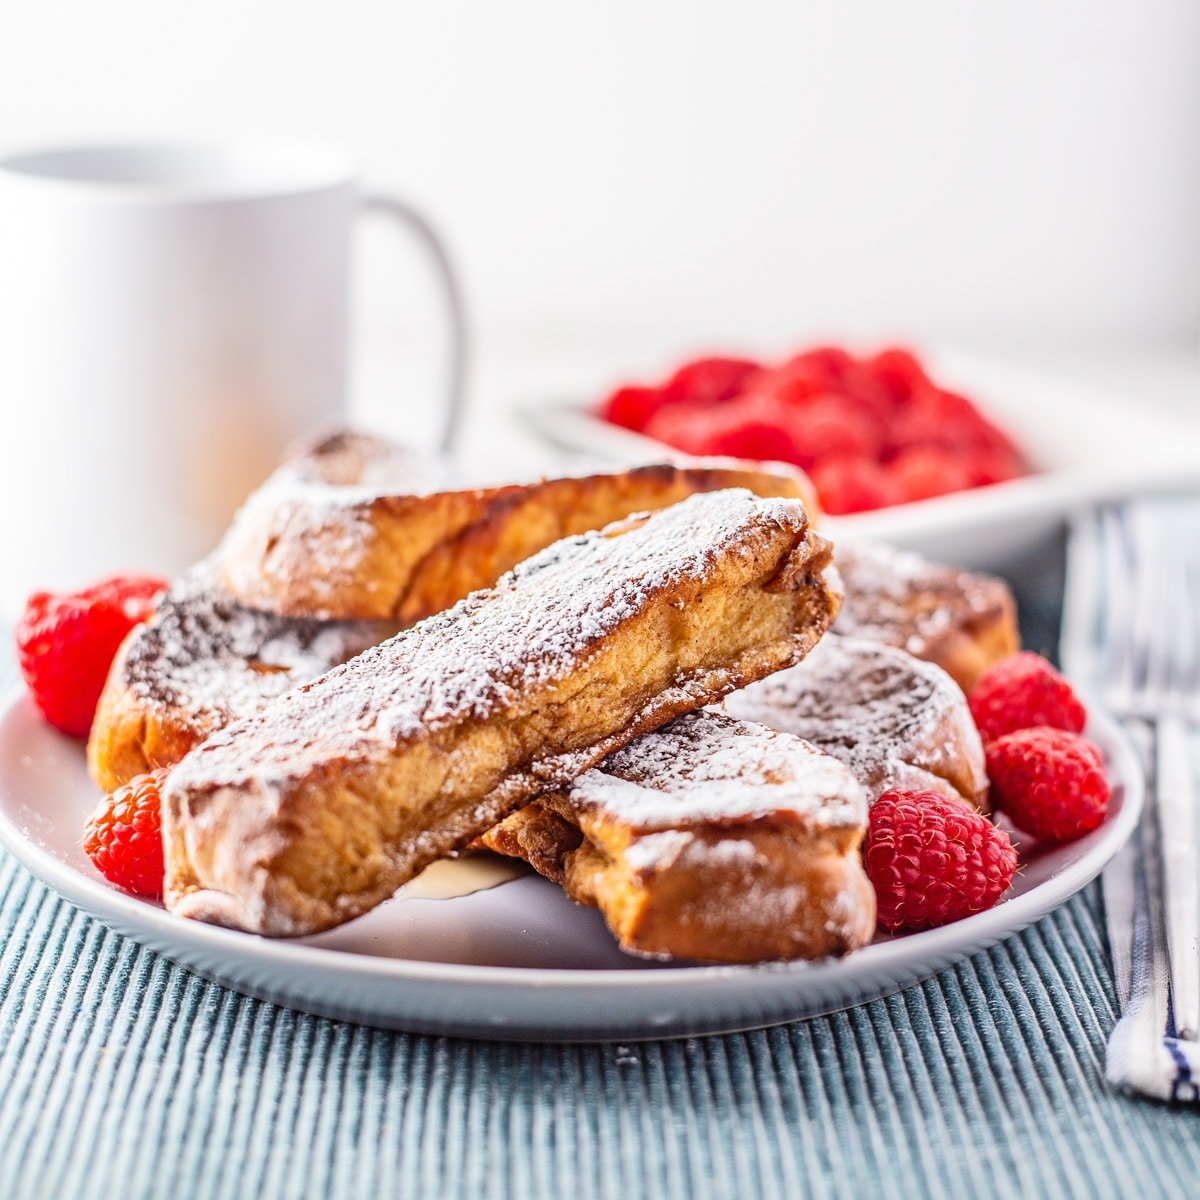 Best homemade French toast sticks recipe plated on a white plate, dusted with confectioners sugar, and served with fresh raspberries.